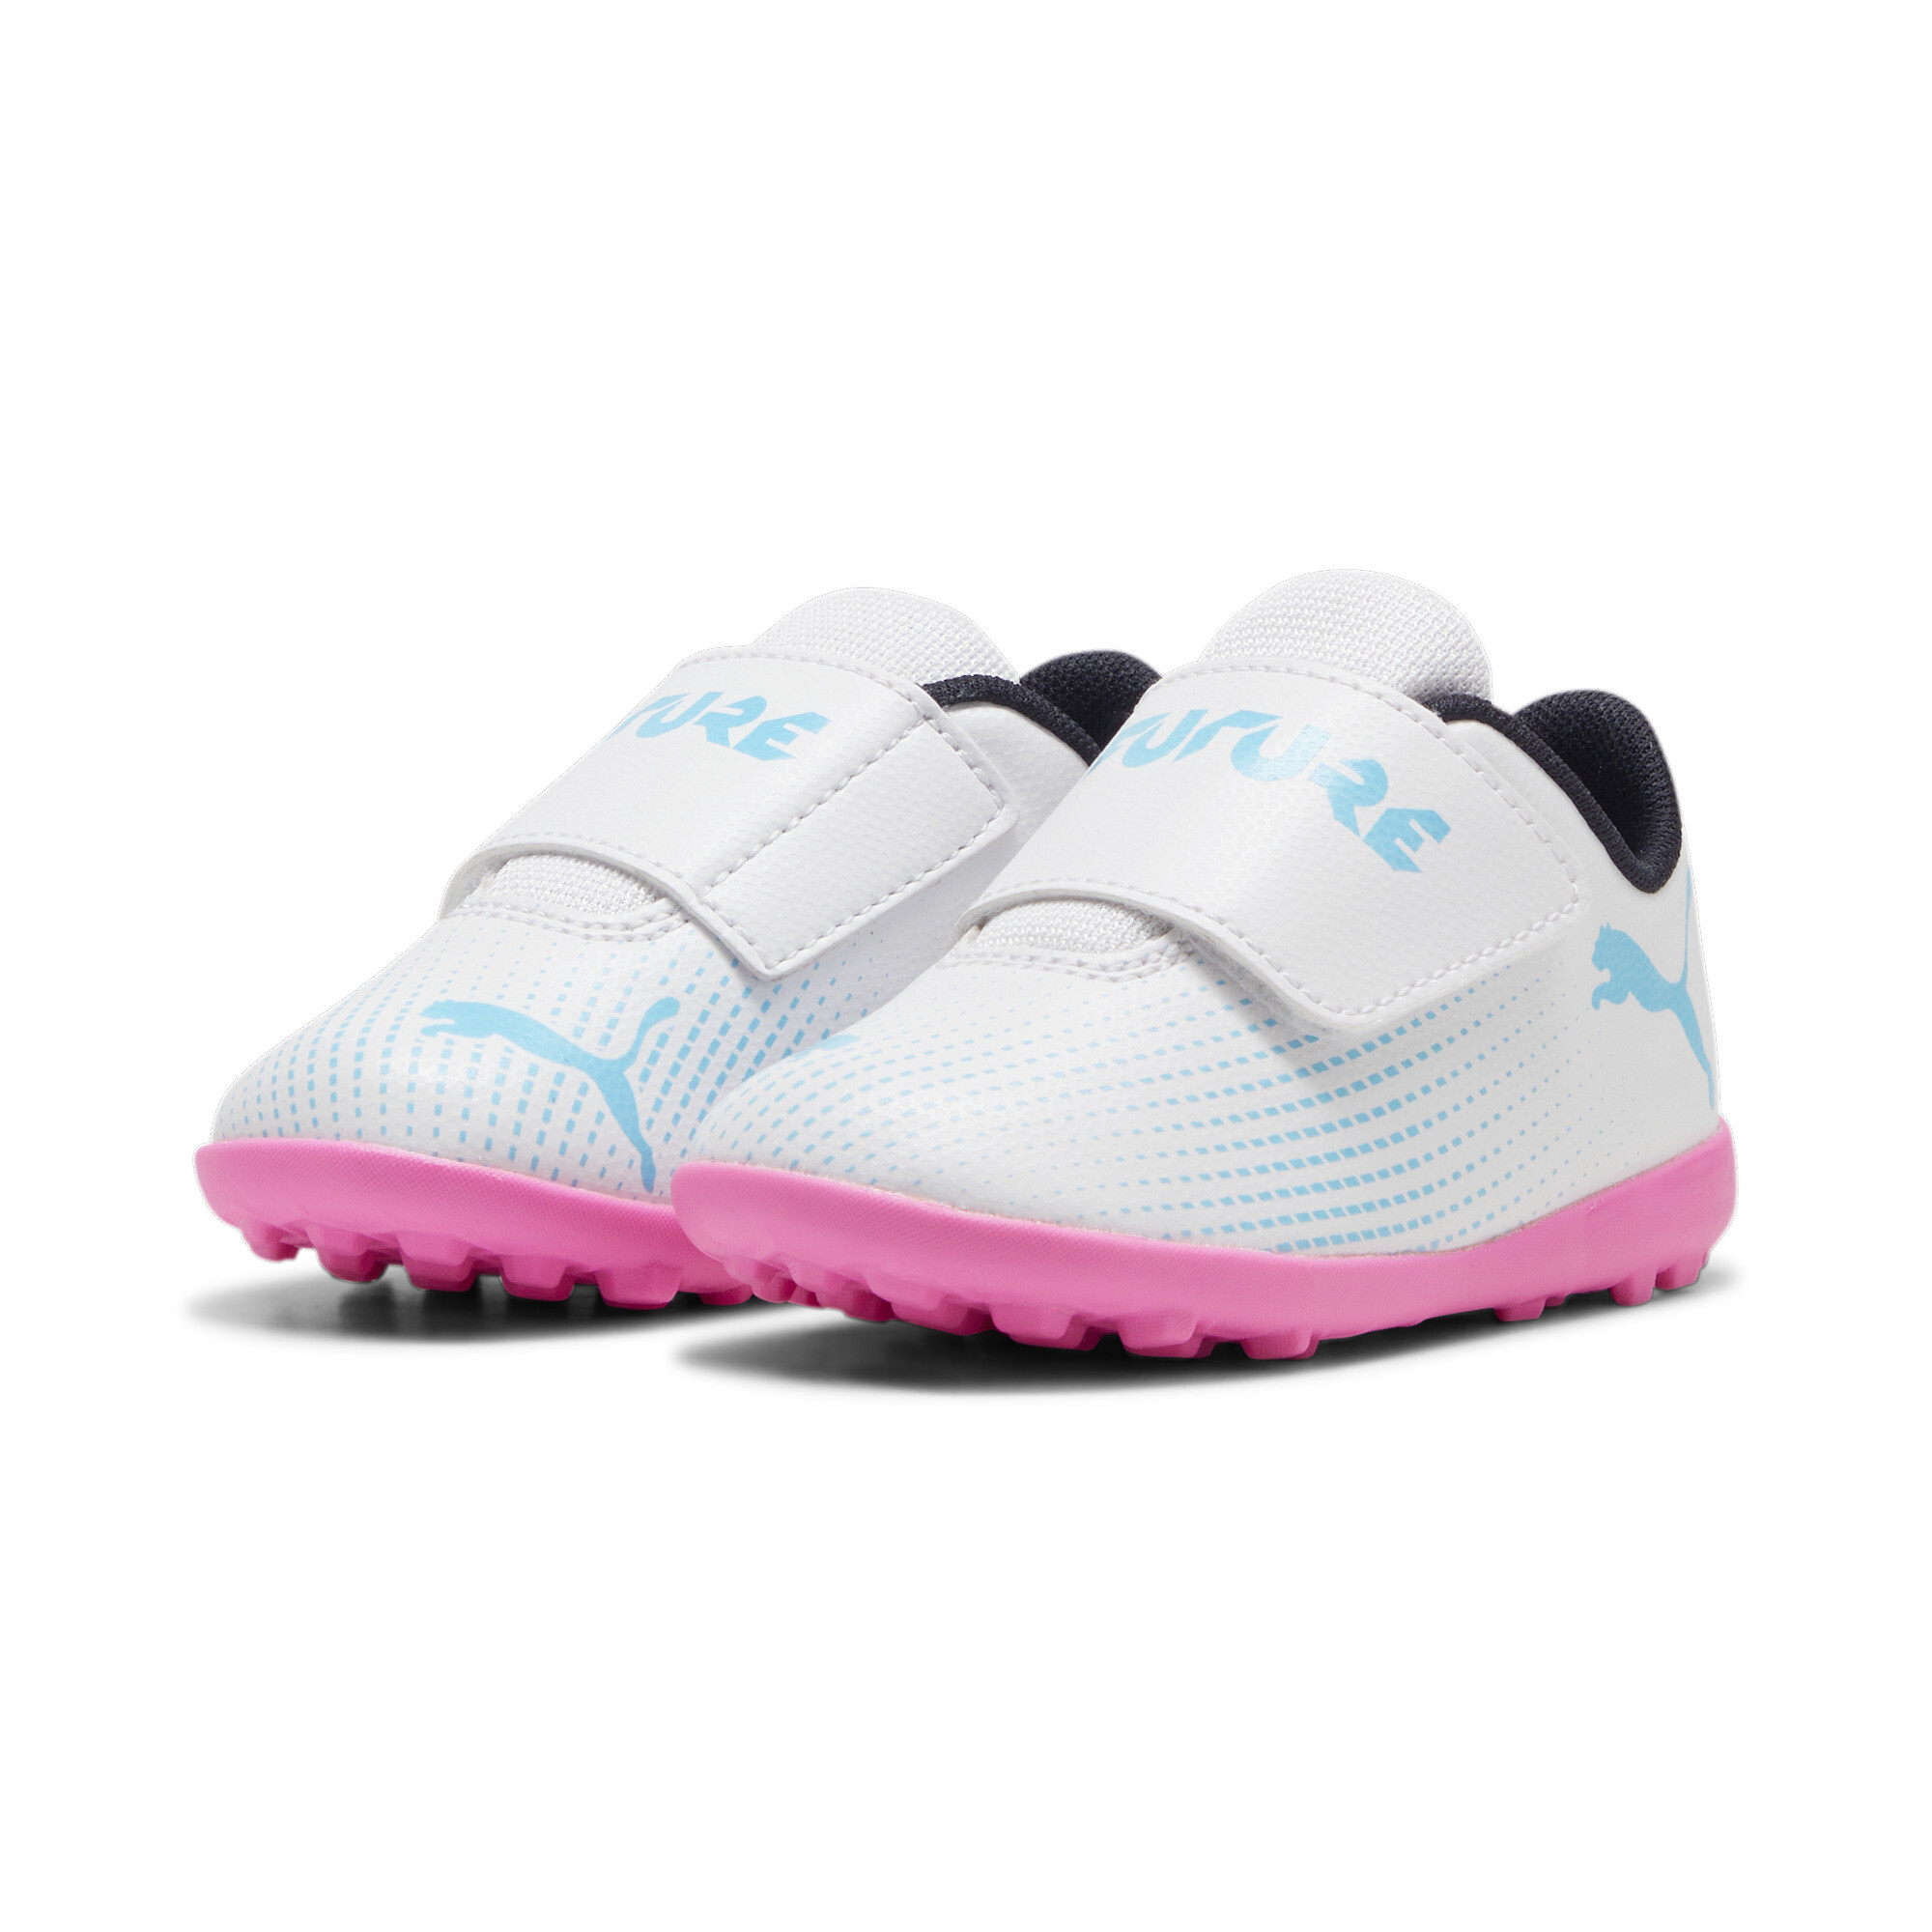 Kids' PUMA FUTURE 7 PLAY TT Toddlers' Football Boots In White/Pink, Size EU 25